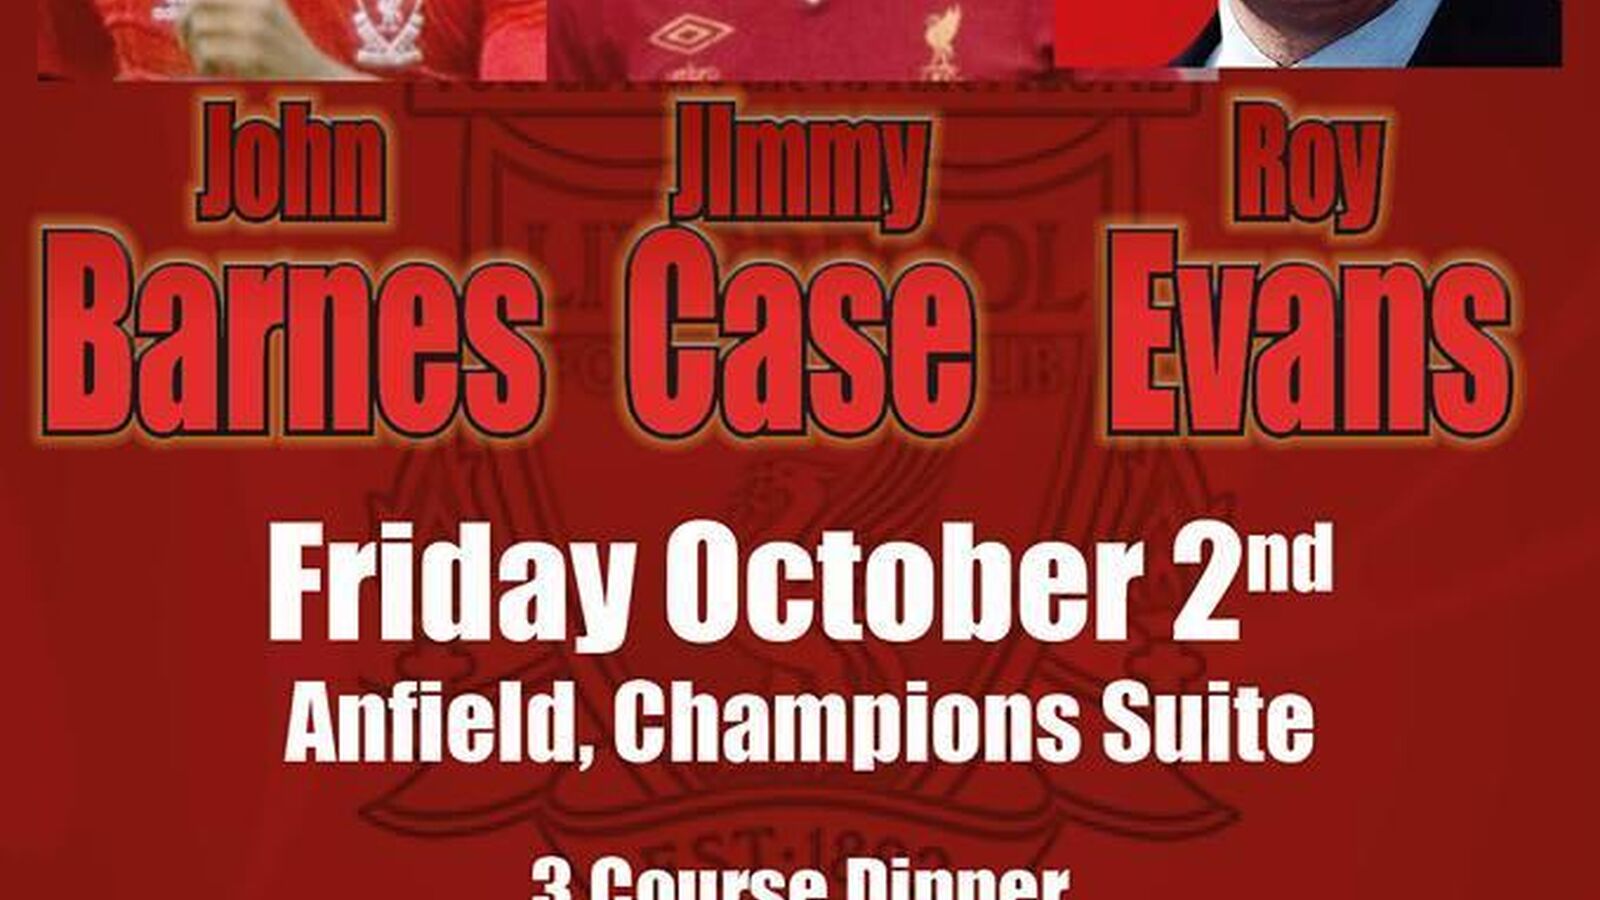 Liverpool FC Legends Charity Evening with Barnes, Case and Evans